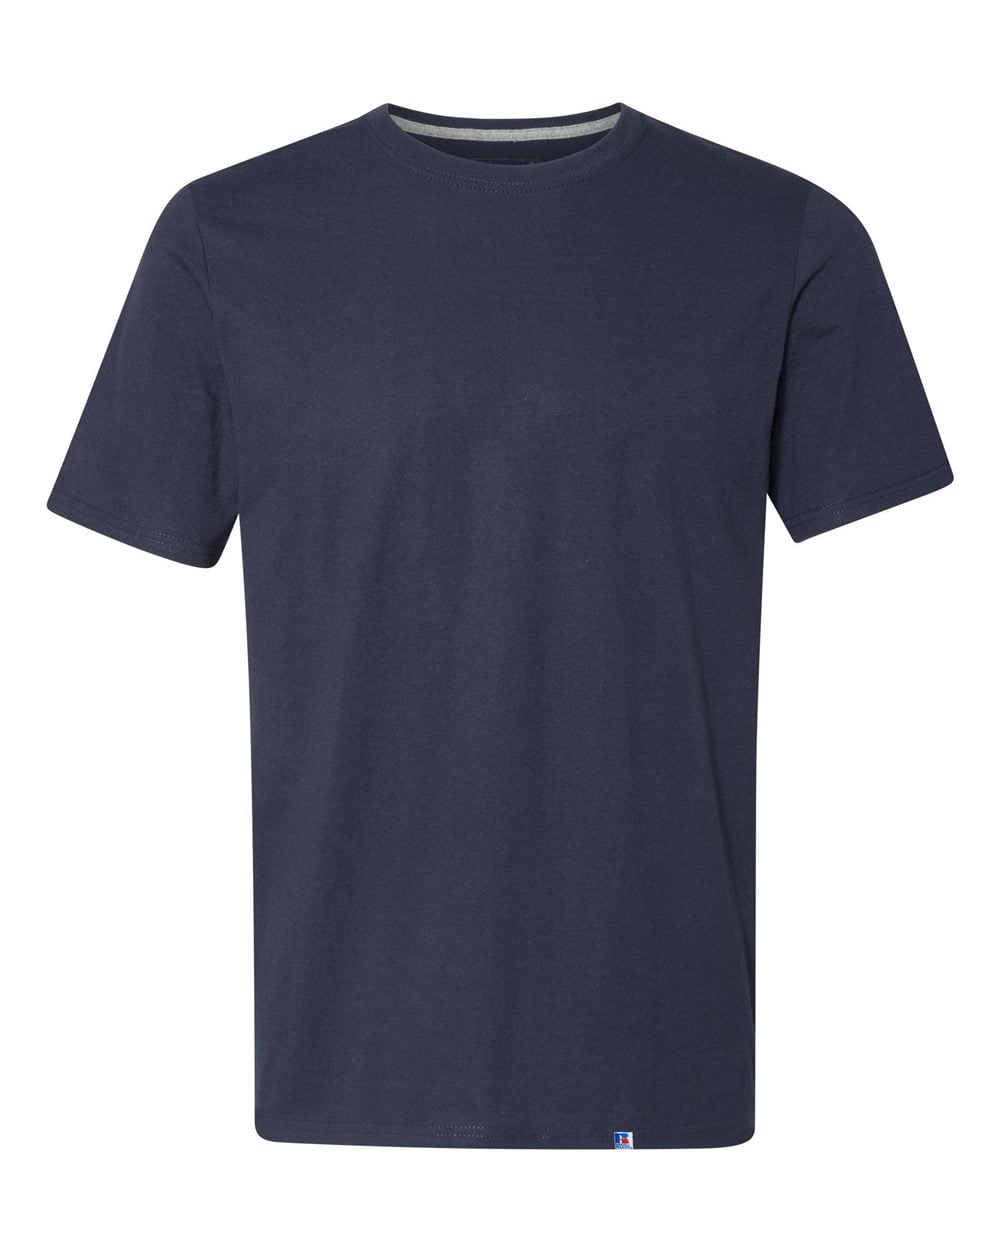  60 Overall T-Shirt : Sports & Outdoors